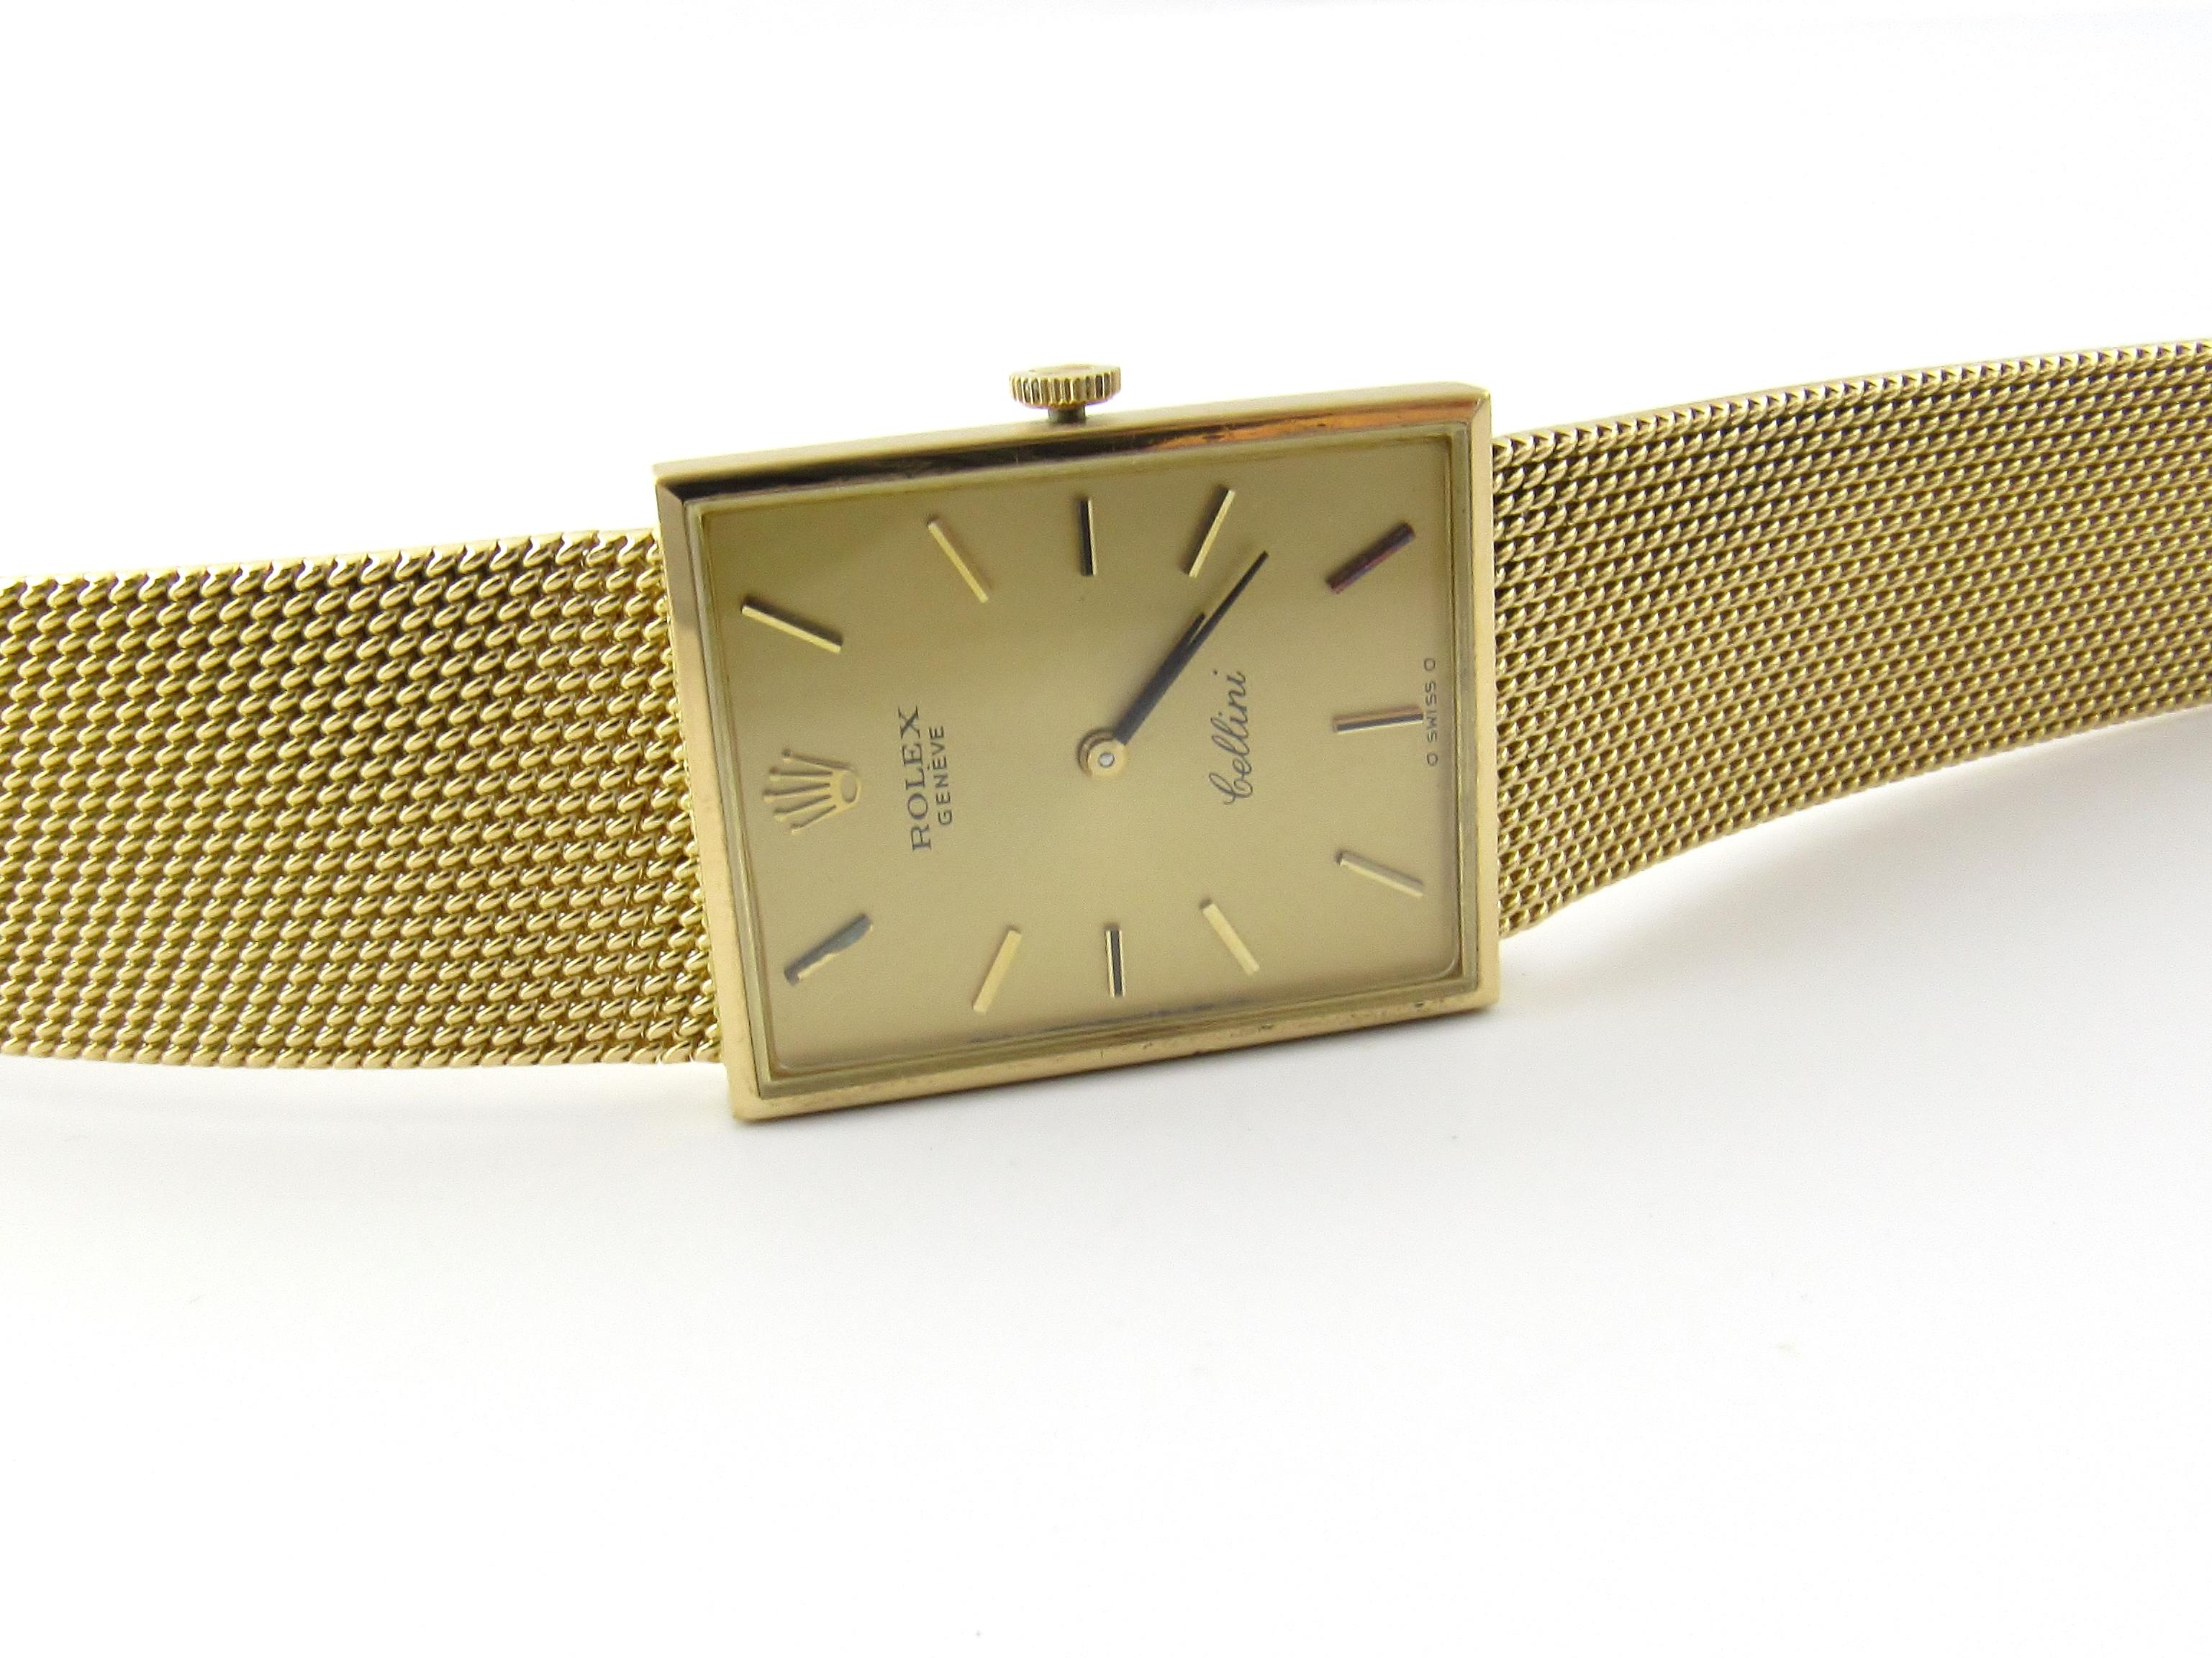 Rolex 18K Yellow Gold Men's Watch

Model: 4089

Serial: 4249383

This authentic Rolex Cellini Watch is from the 1970's

18K Yellow Gold case and band

Gold Dial and markers

Case is approx. 23mm x 28mm

Rolex Cal. 1600 manual wind mechanical